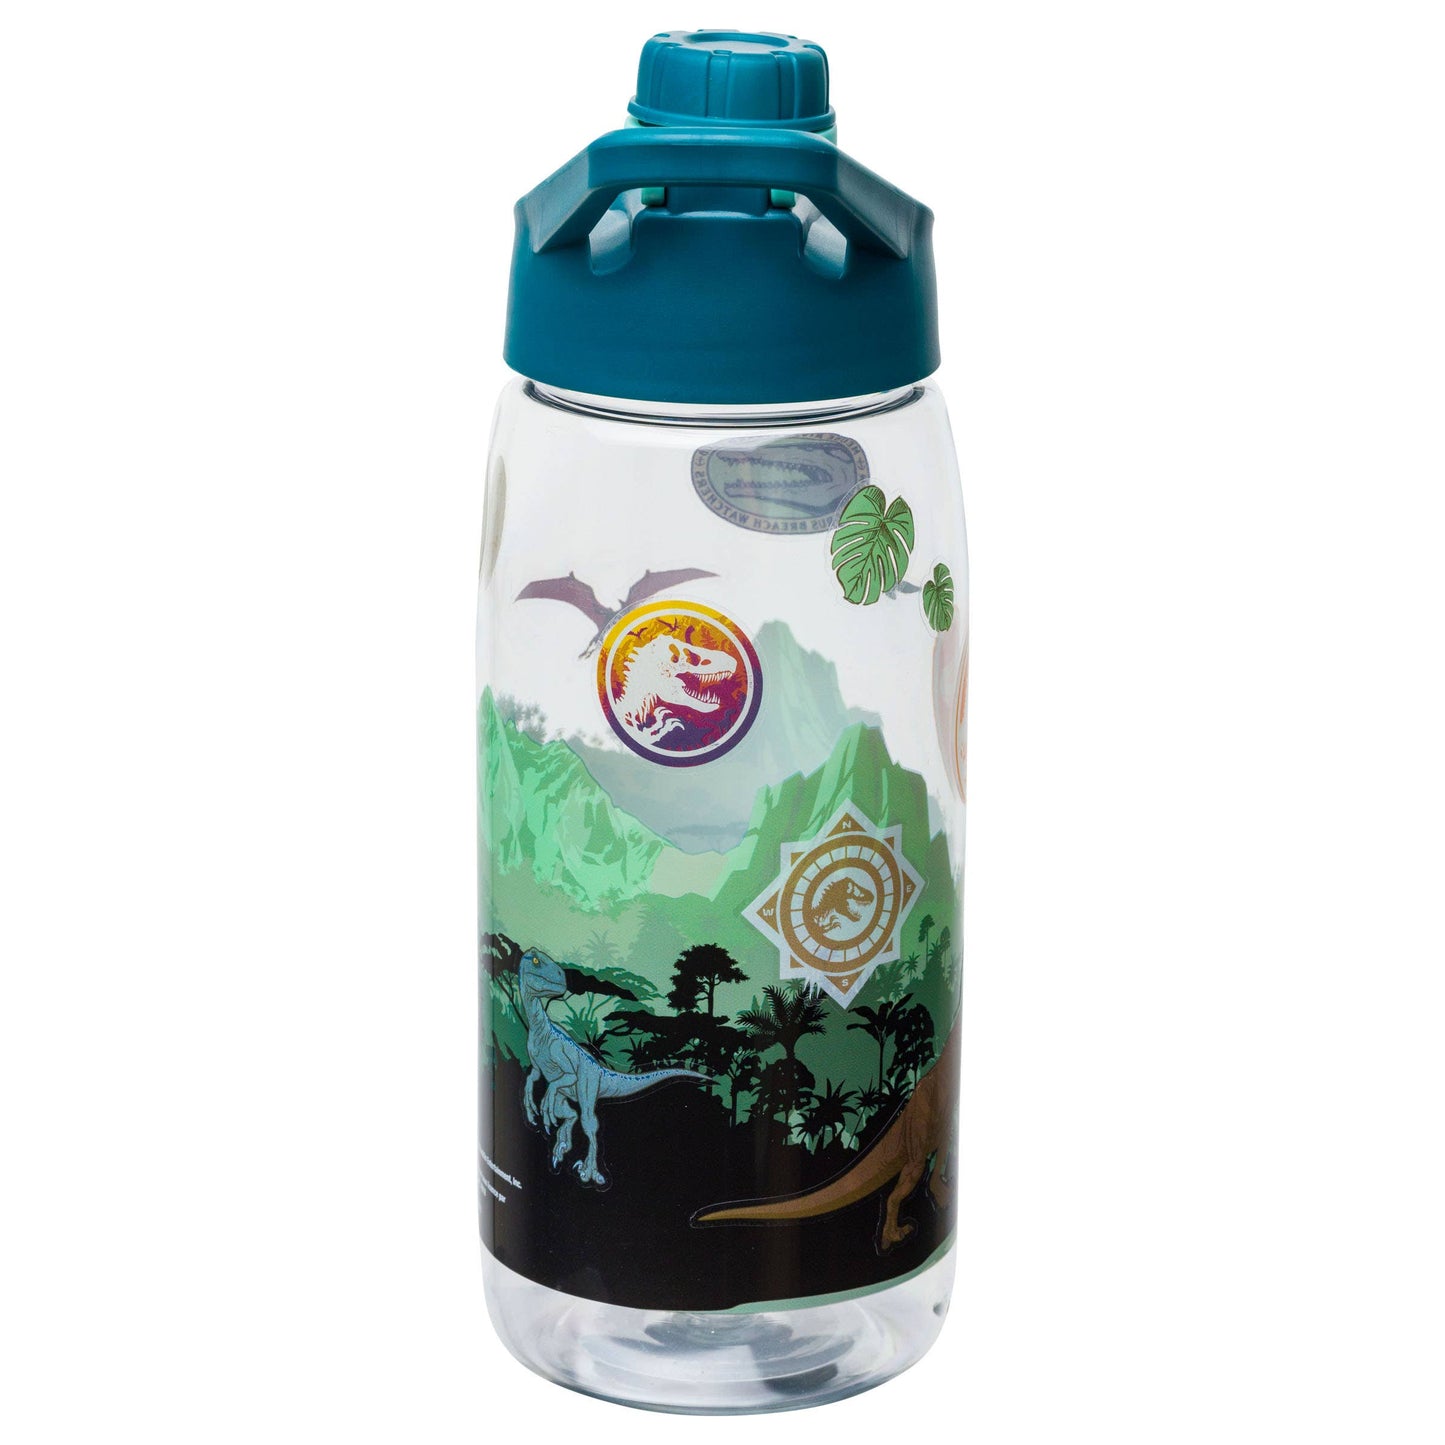 Jurassic Park 20oz Water Bottle with Stickers